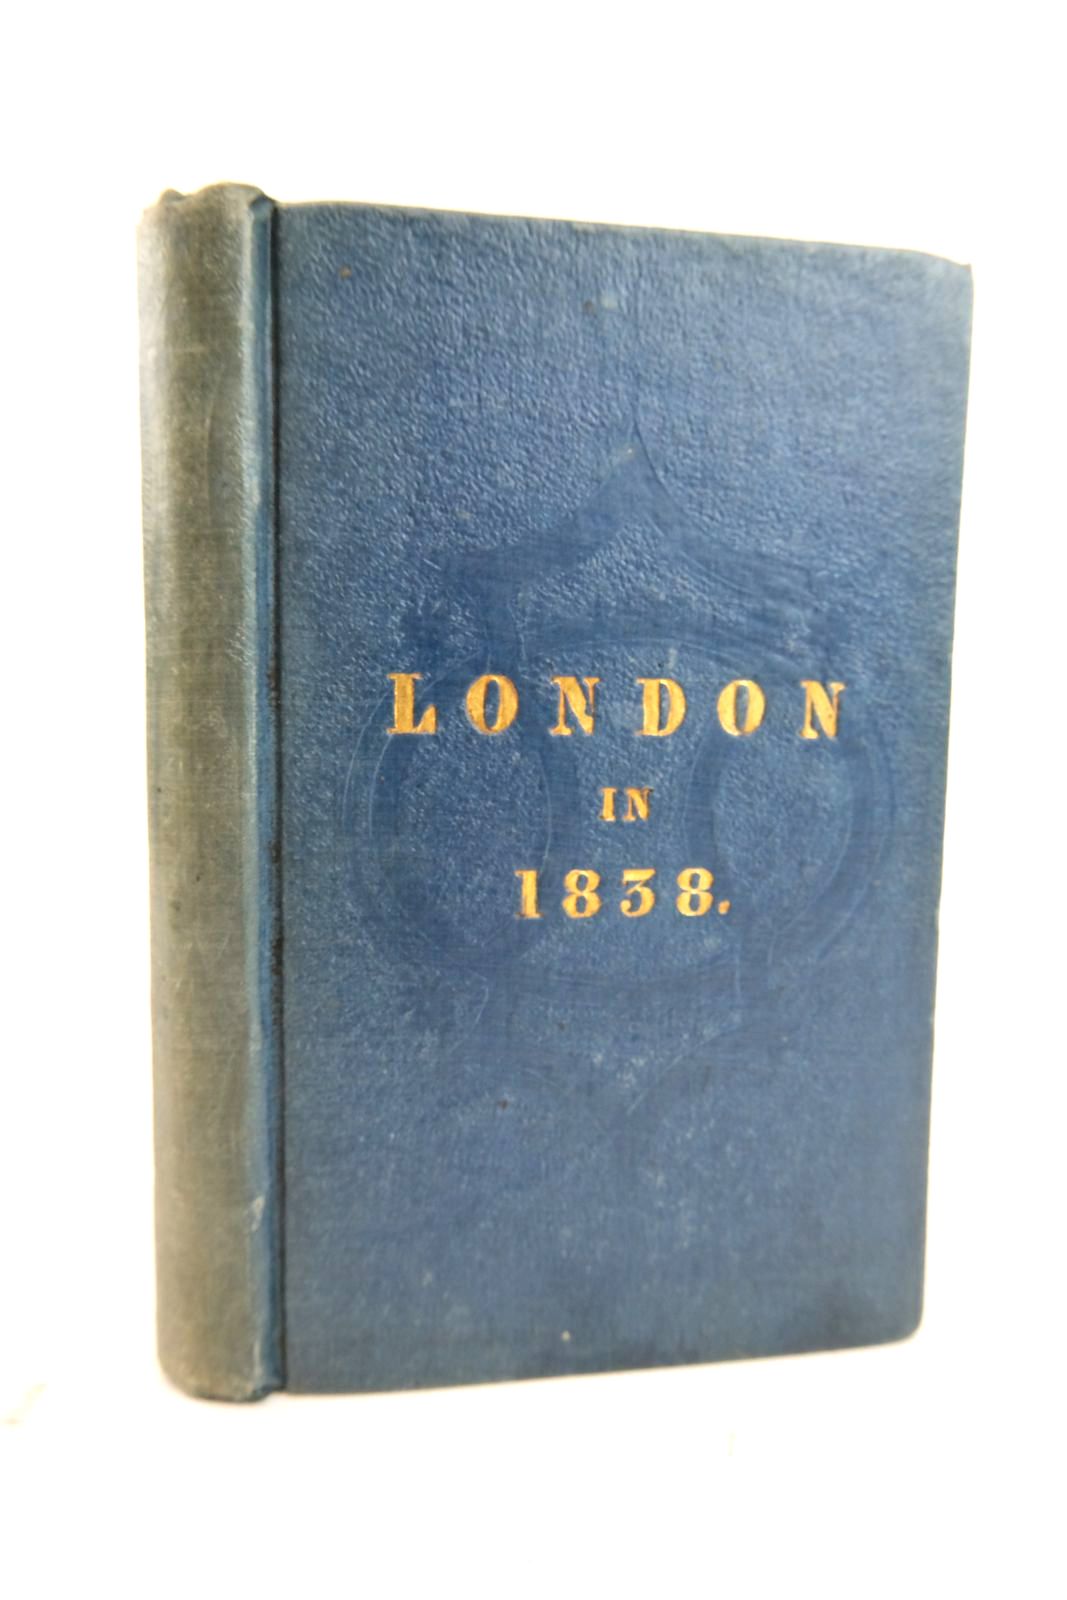 Photo of LONDON IN 1838 written by No Author, An American, published by Samuel Colman (STOCK CODE: 2133861)  for sale by Stella & Rose's Books